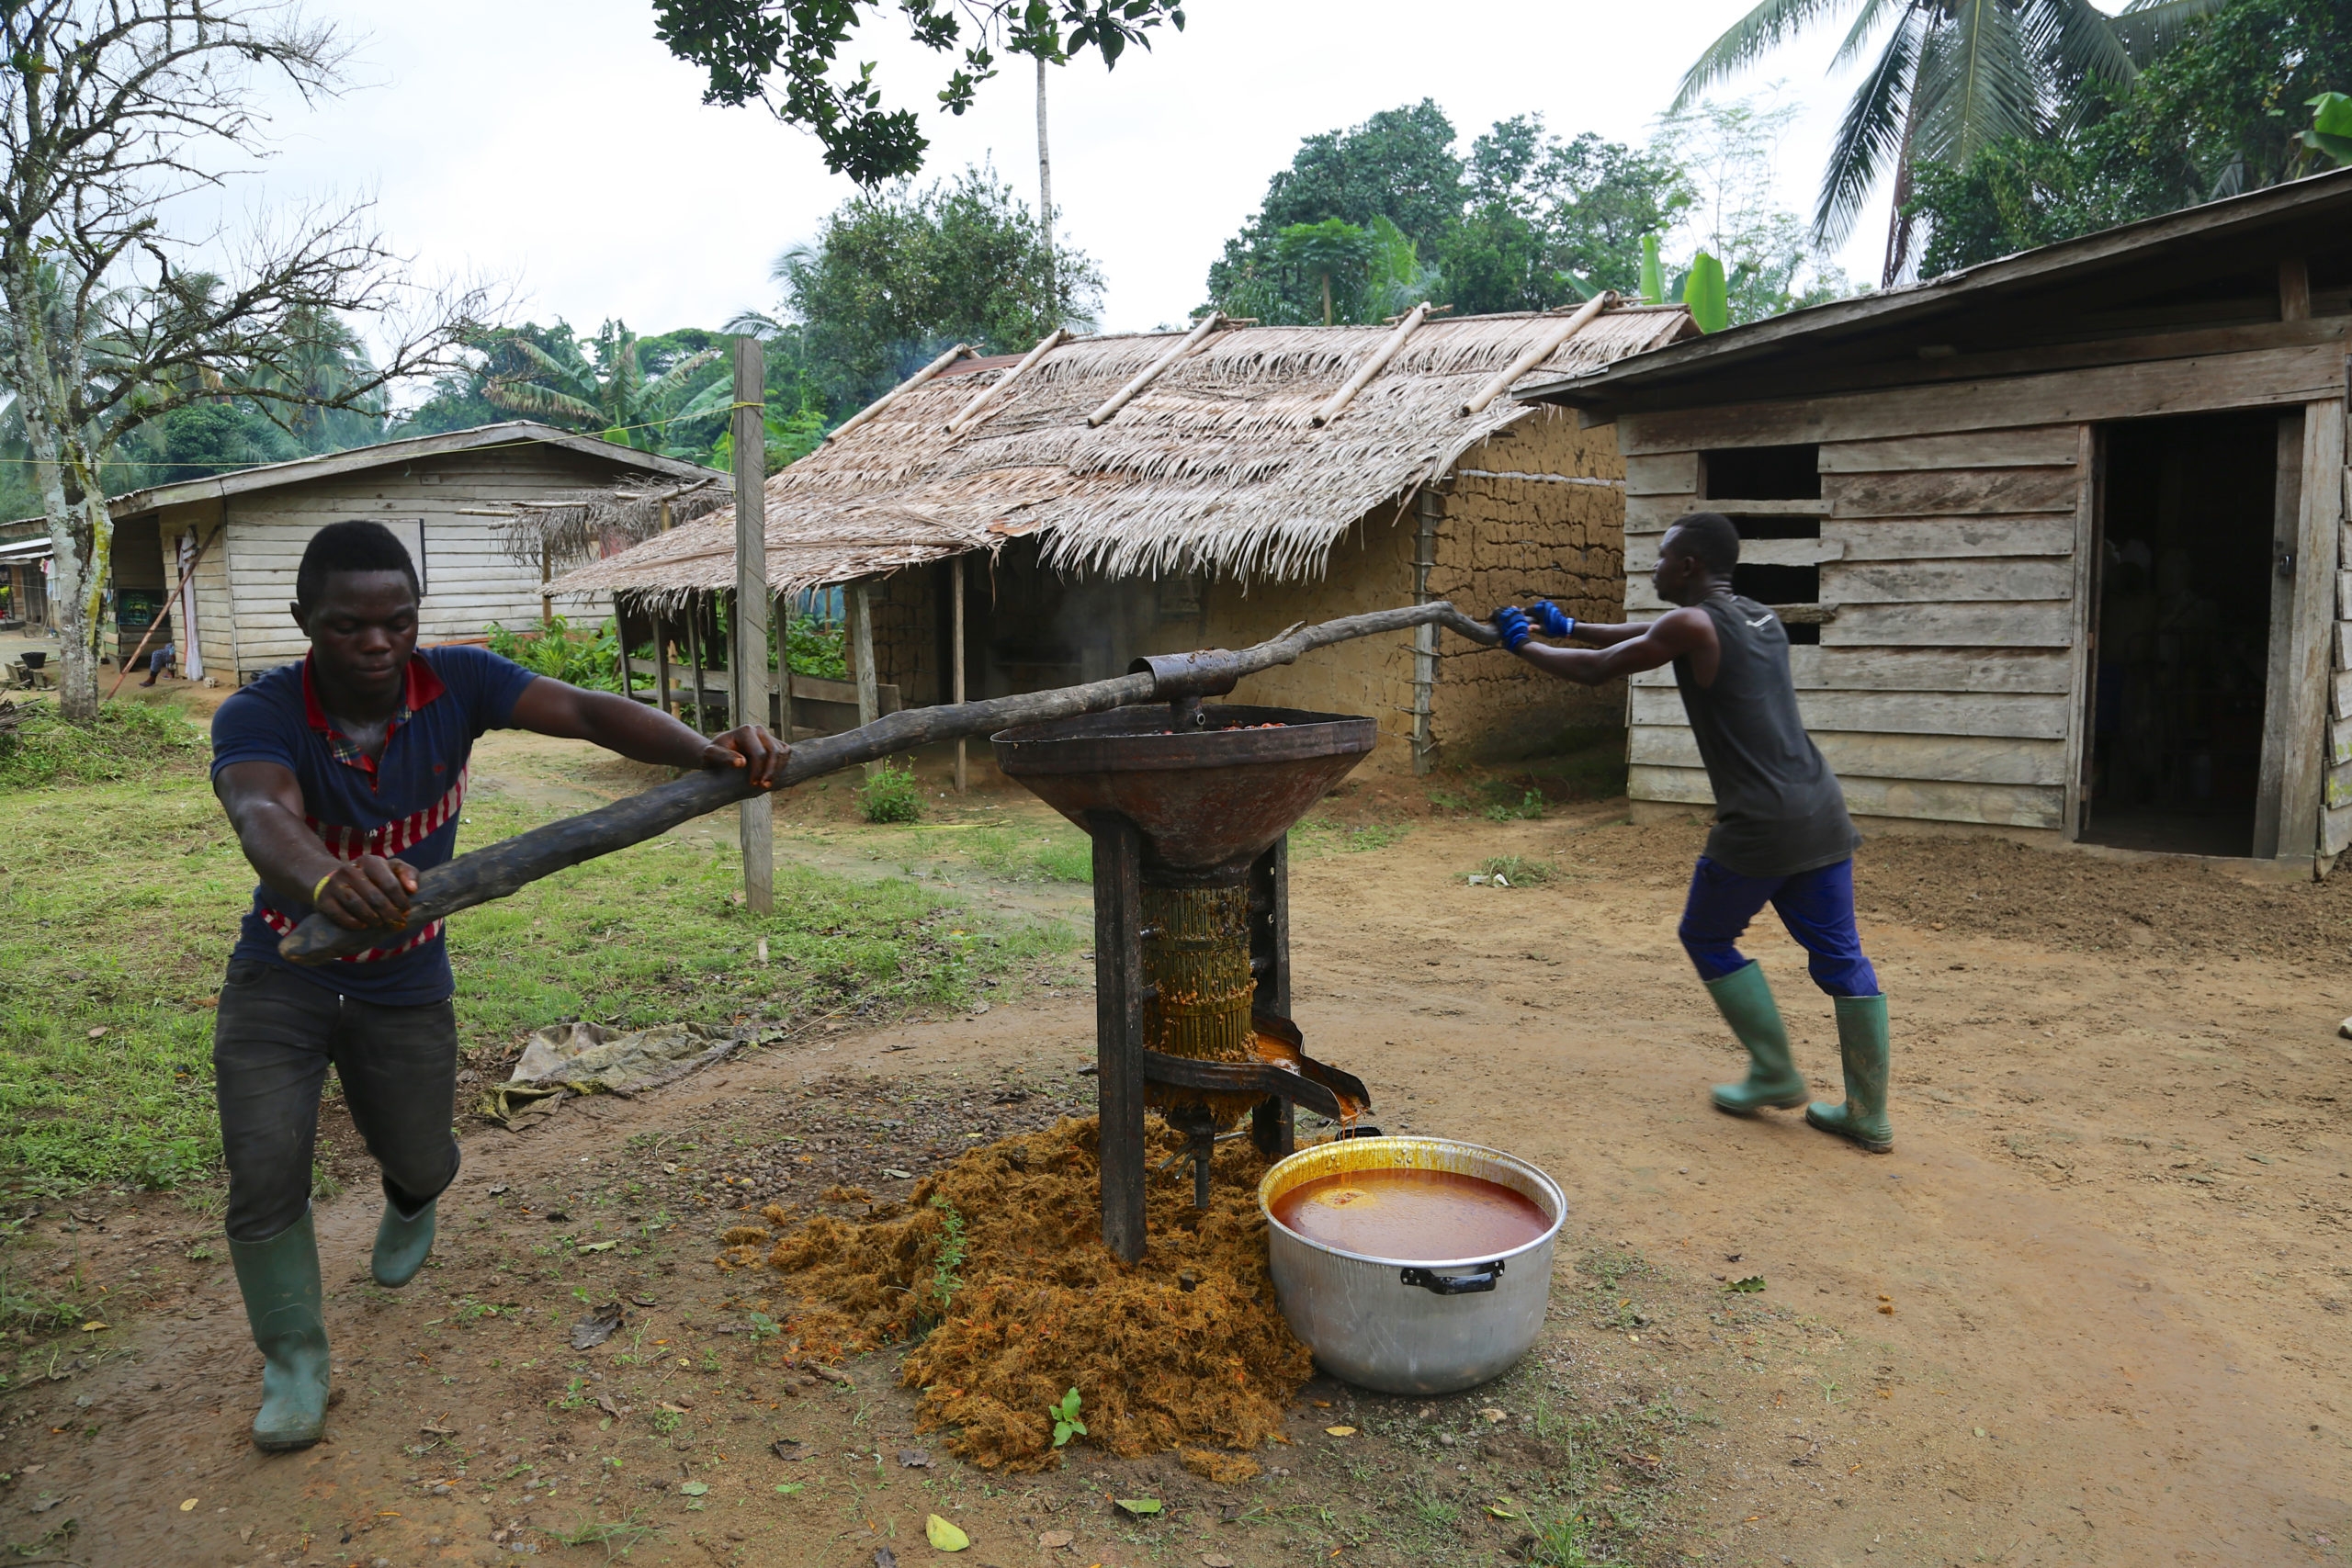 Two men traditionally processing palm fruit to extract oil in Cameroon